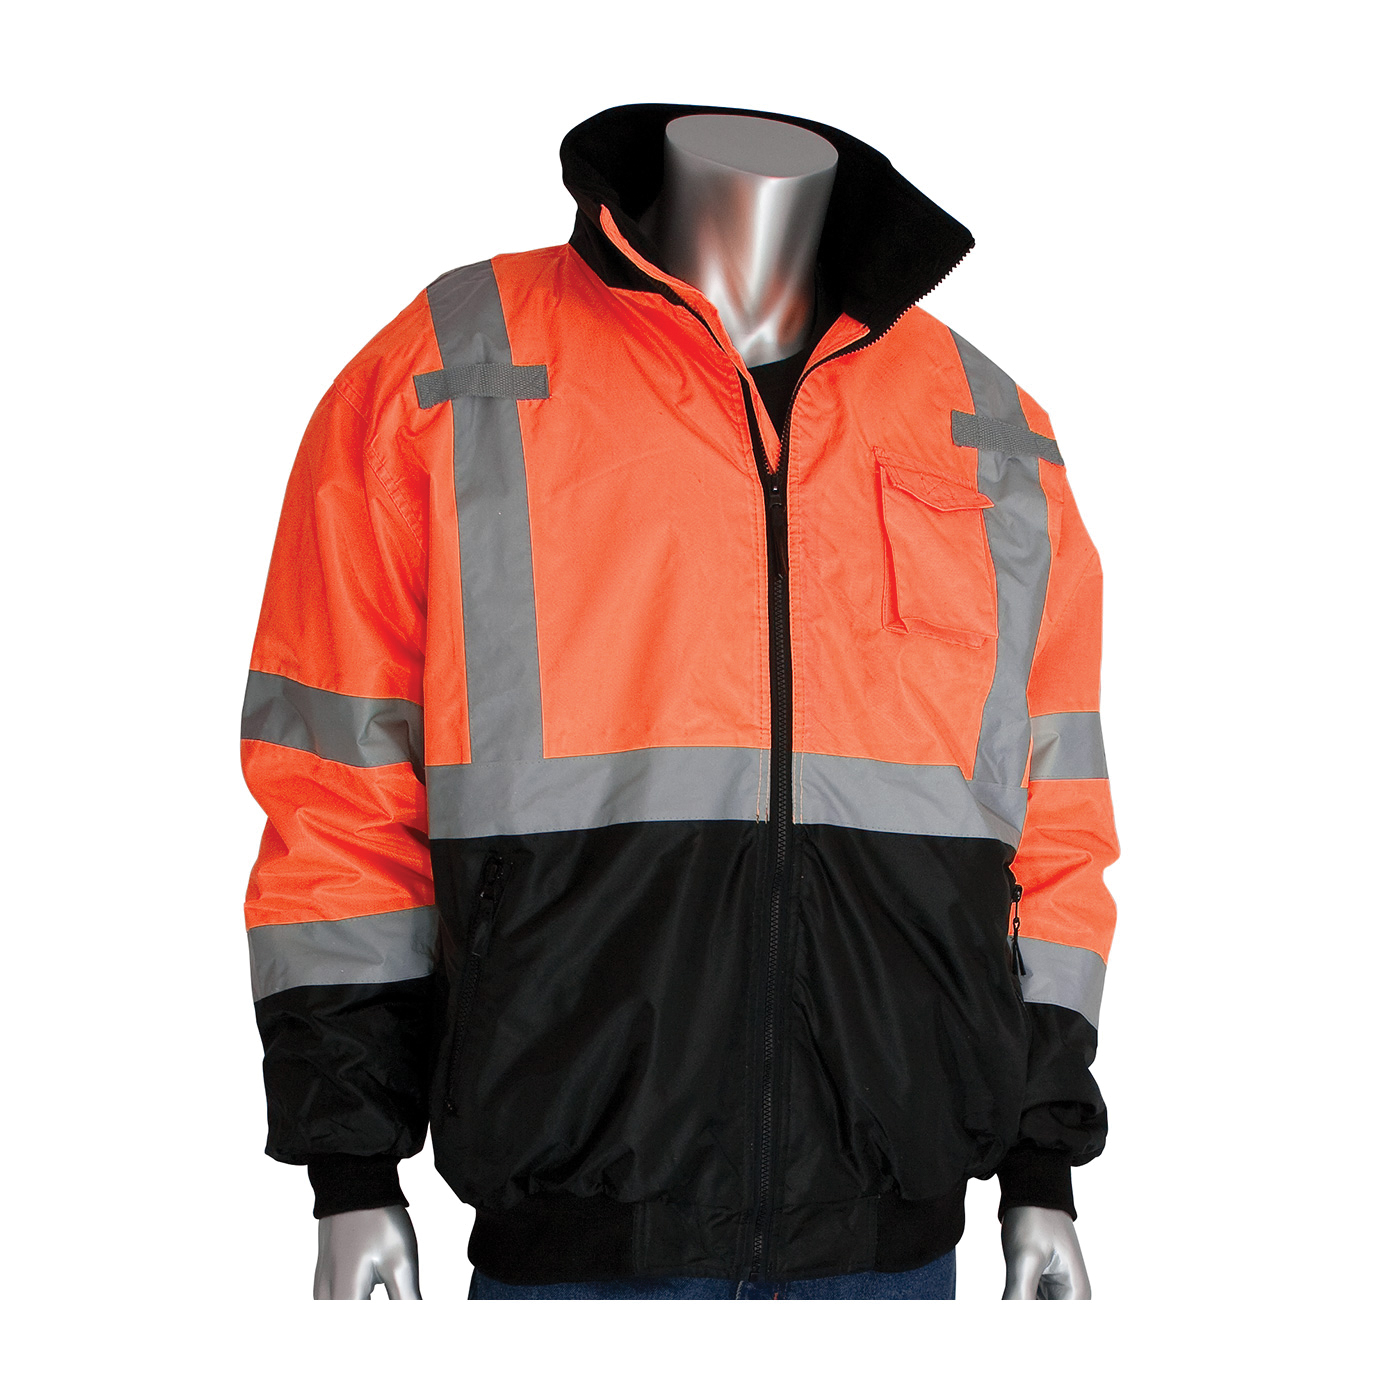 PIP® 333-1766-OR/3X Bomber Jacket With Zip-Out Fleece Liner, Hi-Viz Orange, Polyester, 66 in Chest, Resists: Water, Specifications Met: ANSI 107 Class 3 Type R